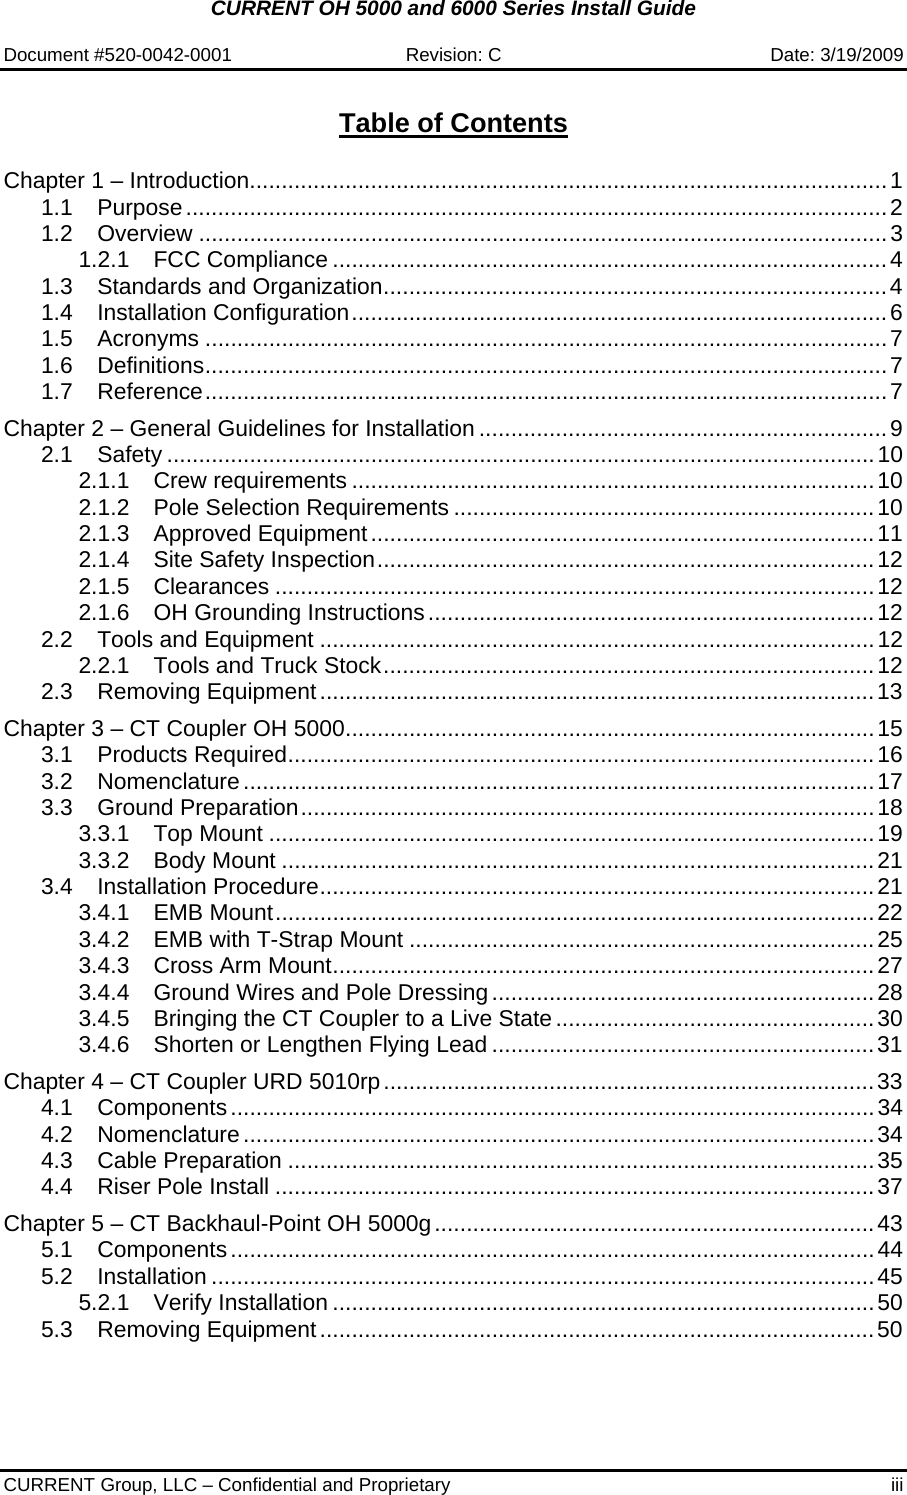 CURRENT OH 5000 and 6000 Series Install Guide  Document #520-0042-0001  Revision: C  Date: 3/19/2009  CURRENT Group, LLC – Confidential and Proprietary  iii  Table of Contents  Chapter 1 – Introduction....................................................................................................1 1.1 Purpose..............................................................................................................2 1.2 Overview ............................................................................................................3 1.2.1 FCC Compliance .......................................................................................4 1.3 Standards and Organization...............................................................................4 1.4 Installation Configuration....................................................................................6 1.5 Acronyms ...........................................................................................................7 1.6 Definitions...........................................................................................................7 1.7 Reference...........................................................................................................7 Chapter 2 – General Guidelines for Installation ................................................................9 2.1 Safety ...............................................................................................................10 2.1.1 Crew requirements ..................................................................................10 2.1.2 Pole Selection Requirements ..................................................................10 2.1.3 Approved Equipment...............................................................................11 2.1.4 Site Safety Inspection..............................................................................12 2.1.5 Clearances ..............................................................................................12 2.1.6 OH Grounding Instructions......................................................................12 2.2 Tools and Equipment .......................................................................................12 2.2.1 Tools and Truck Stock.............................................................................12 2.3 Removing Equipment.......................................................................................13 Chapter 3 – CT Coupler OH 5000...................................................................................15 3.1 Products Required............................................................................................16 3.2 Nomenclature...................................................................................................17 3.3 Ground Preparation..........................................................................................18 3.3.1 Top Mount ...............................................................................................19 3.3.2 Body Mount .............................................................................................21 3.4 Installation Procedure.......................................................................................21 3.4.1 EMB Mount..............................................................................................22 3.4.2 EMB with T-Strap Mount .........................................................................25 3.4.3 Cross Arm Mount.....................................................................................27 3.4.4 Ground Wires and Pole Dressing............................................................28 3.4.5 Bringing the CT Coupler to a Live State..................................................30 3.4.6 Shorten or Lengthen Flying Lead ............................................................31 Chapter 4 – CT Coupler URD 5010rp.............................................................................33 4.1 Components.....................................................................................................34 4.2 Nomenclature...................................................................................................34 4.3 Cable Preparation ............................................................................................35 4.4 Riser Pole Install ..............................................................................................37 Chapter 5 – CT Backhaul-Point OH 5000g.....................................................................43 5.1 Components.....................................................................................................44 5.2 Installation ........................................................................................................45 5.2.1 Verify Installation .....................................................................................50 5.3 Removing Equipment.......................................................................................50 